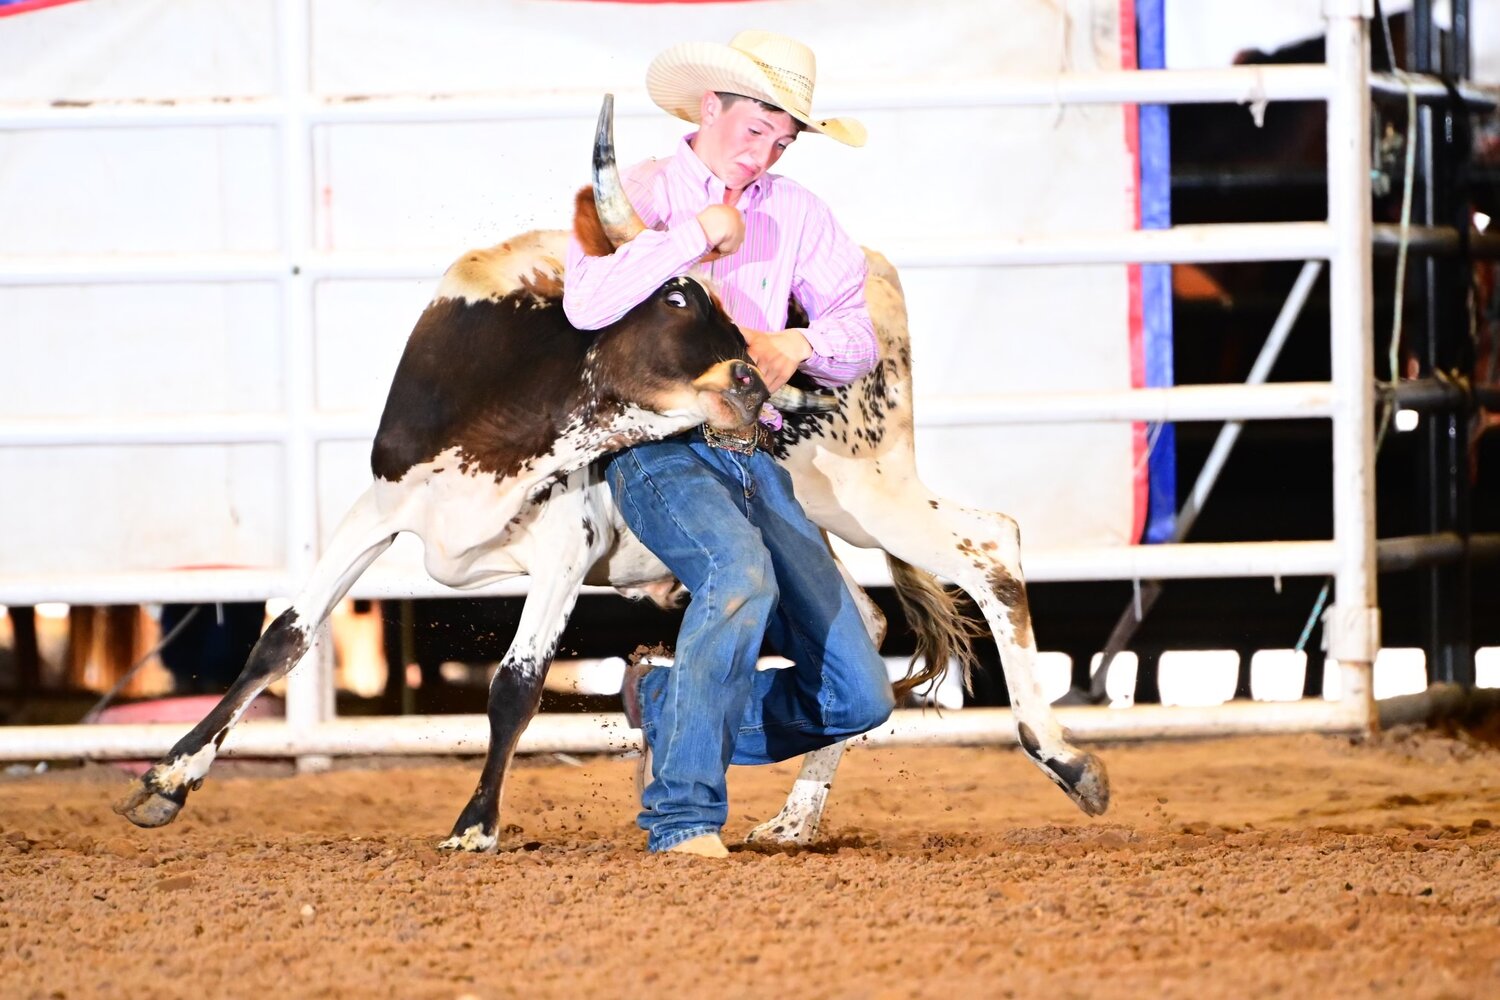 Dyllon Richardson, 14, wrestles a steer for the chute dogging competition.